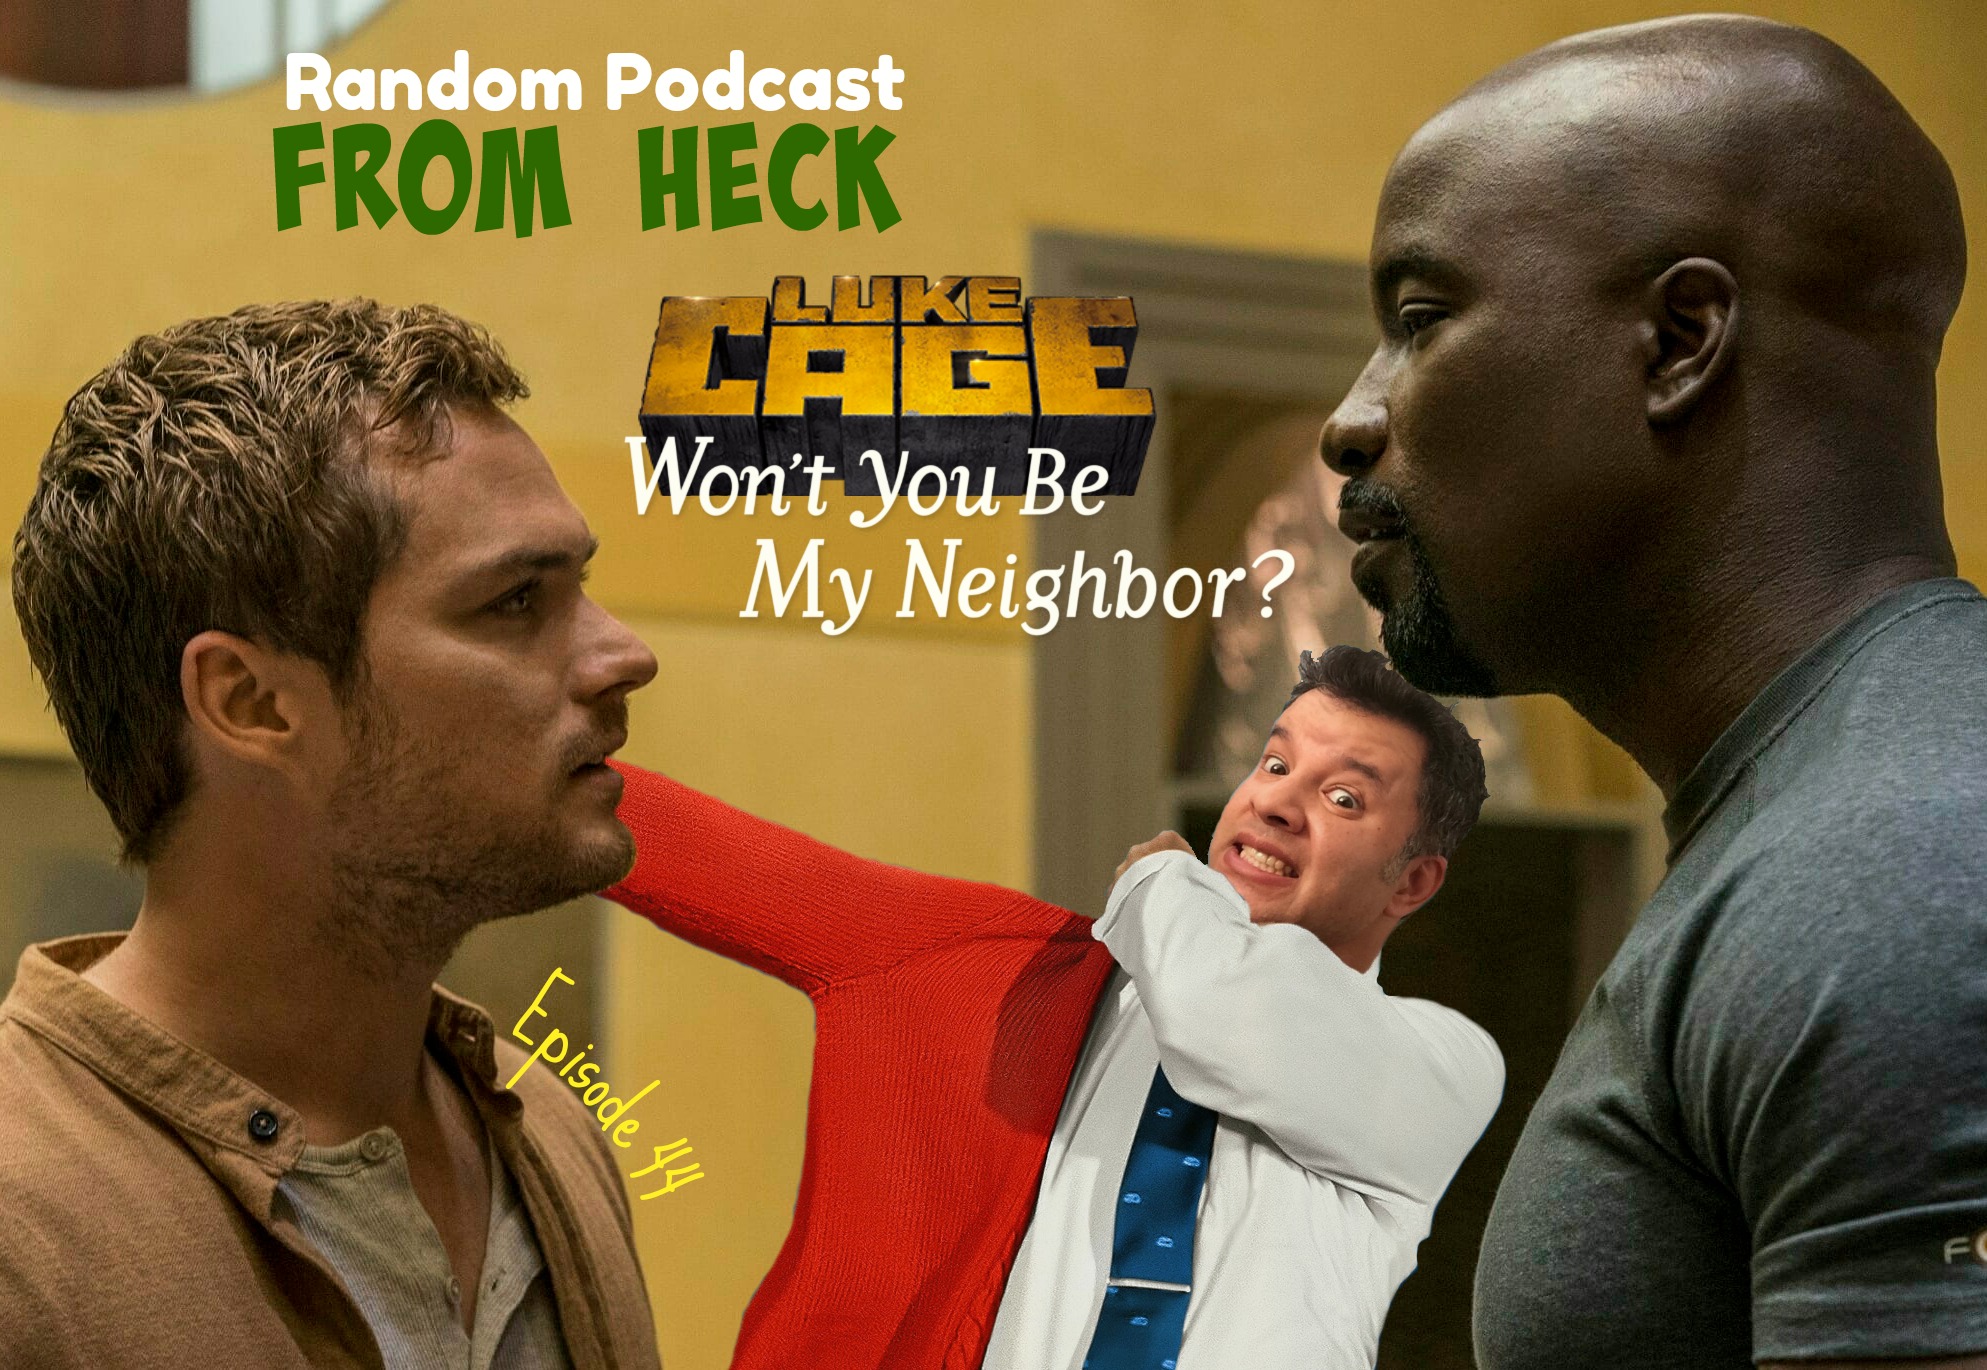 Episode 44: Luke Cage S2, Won't You Be My Neighbor, And More